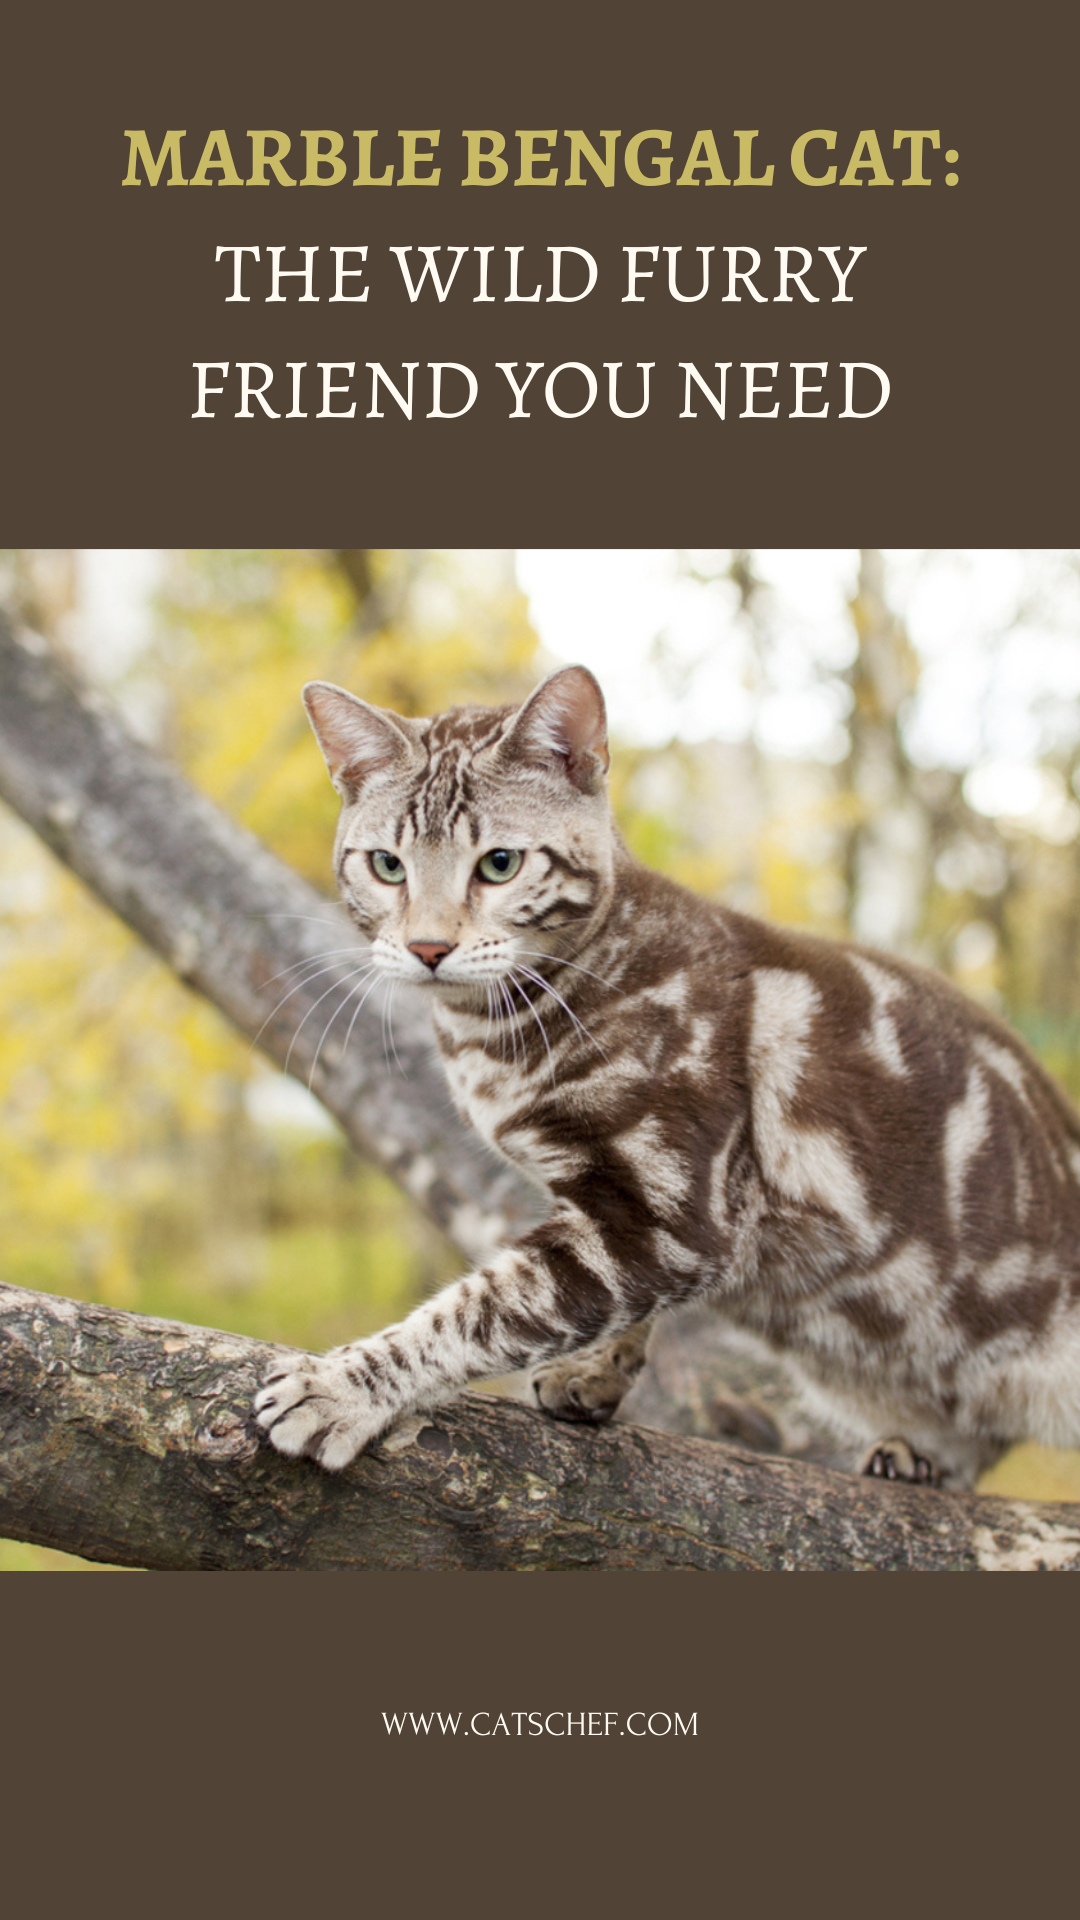 Marble Bengal Cat: The Wild Furry Friend You Need